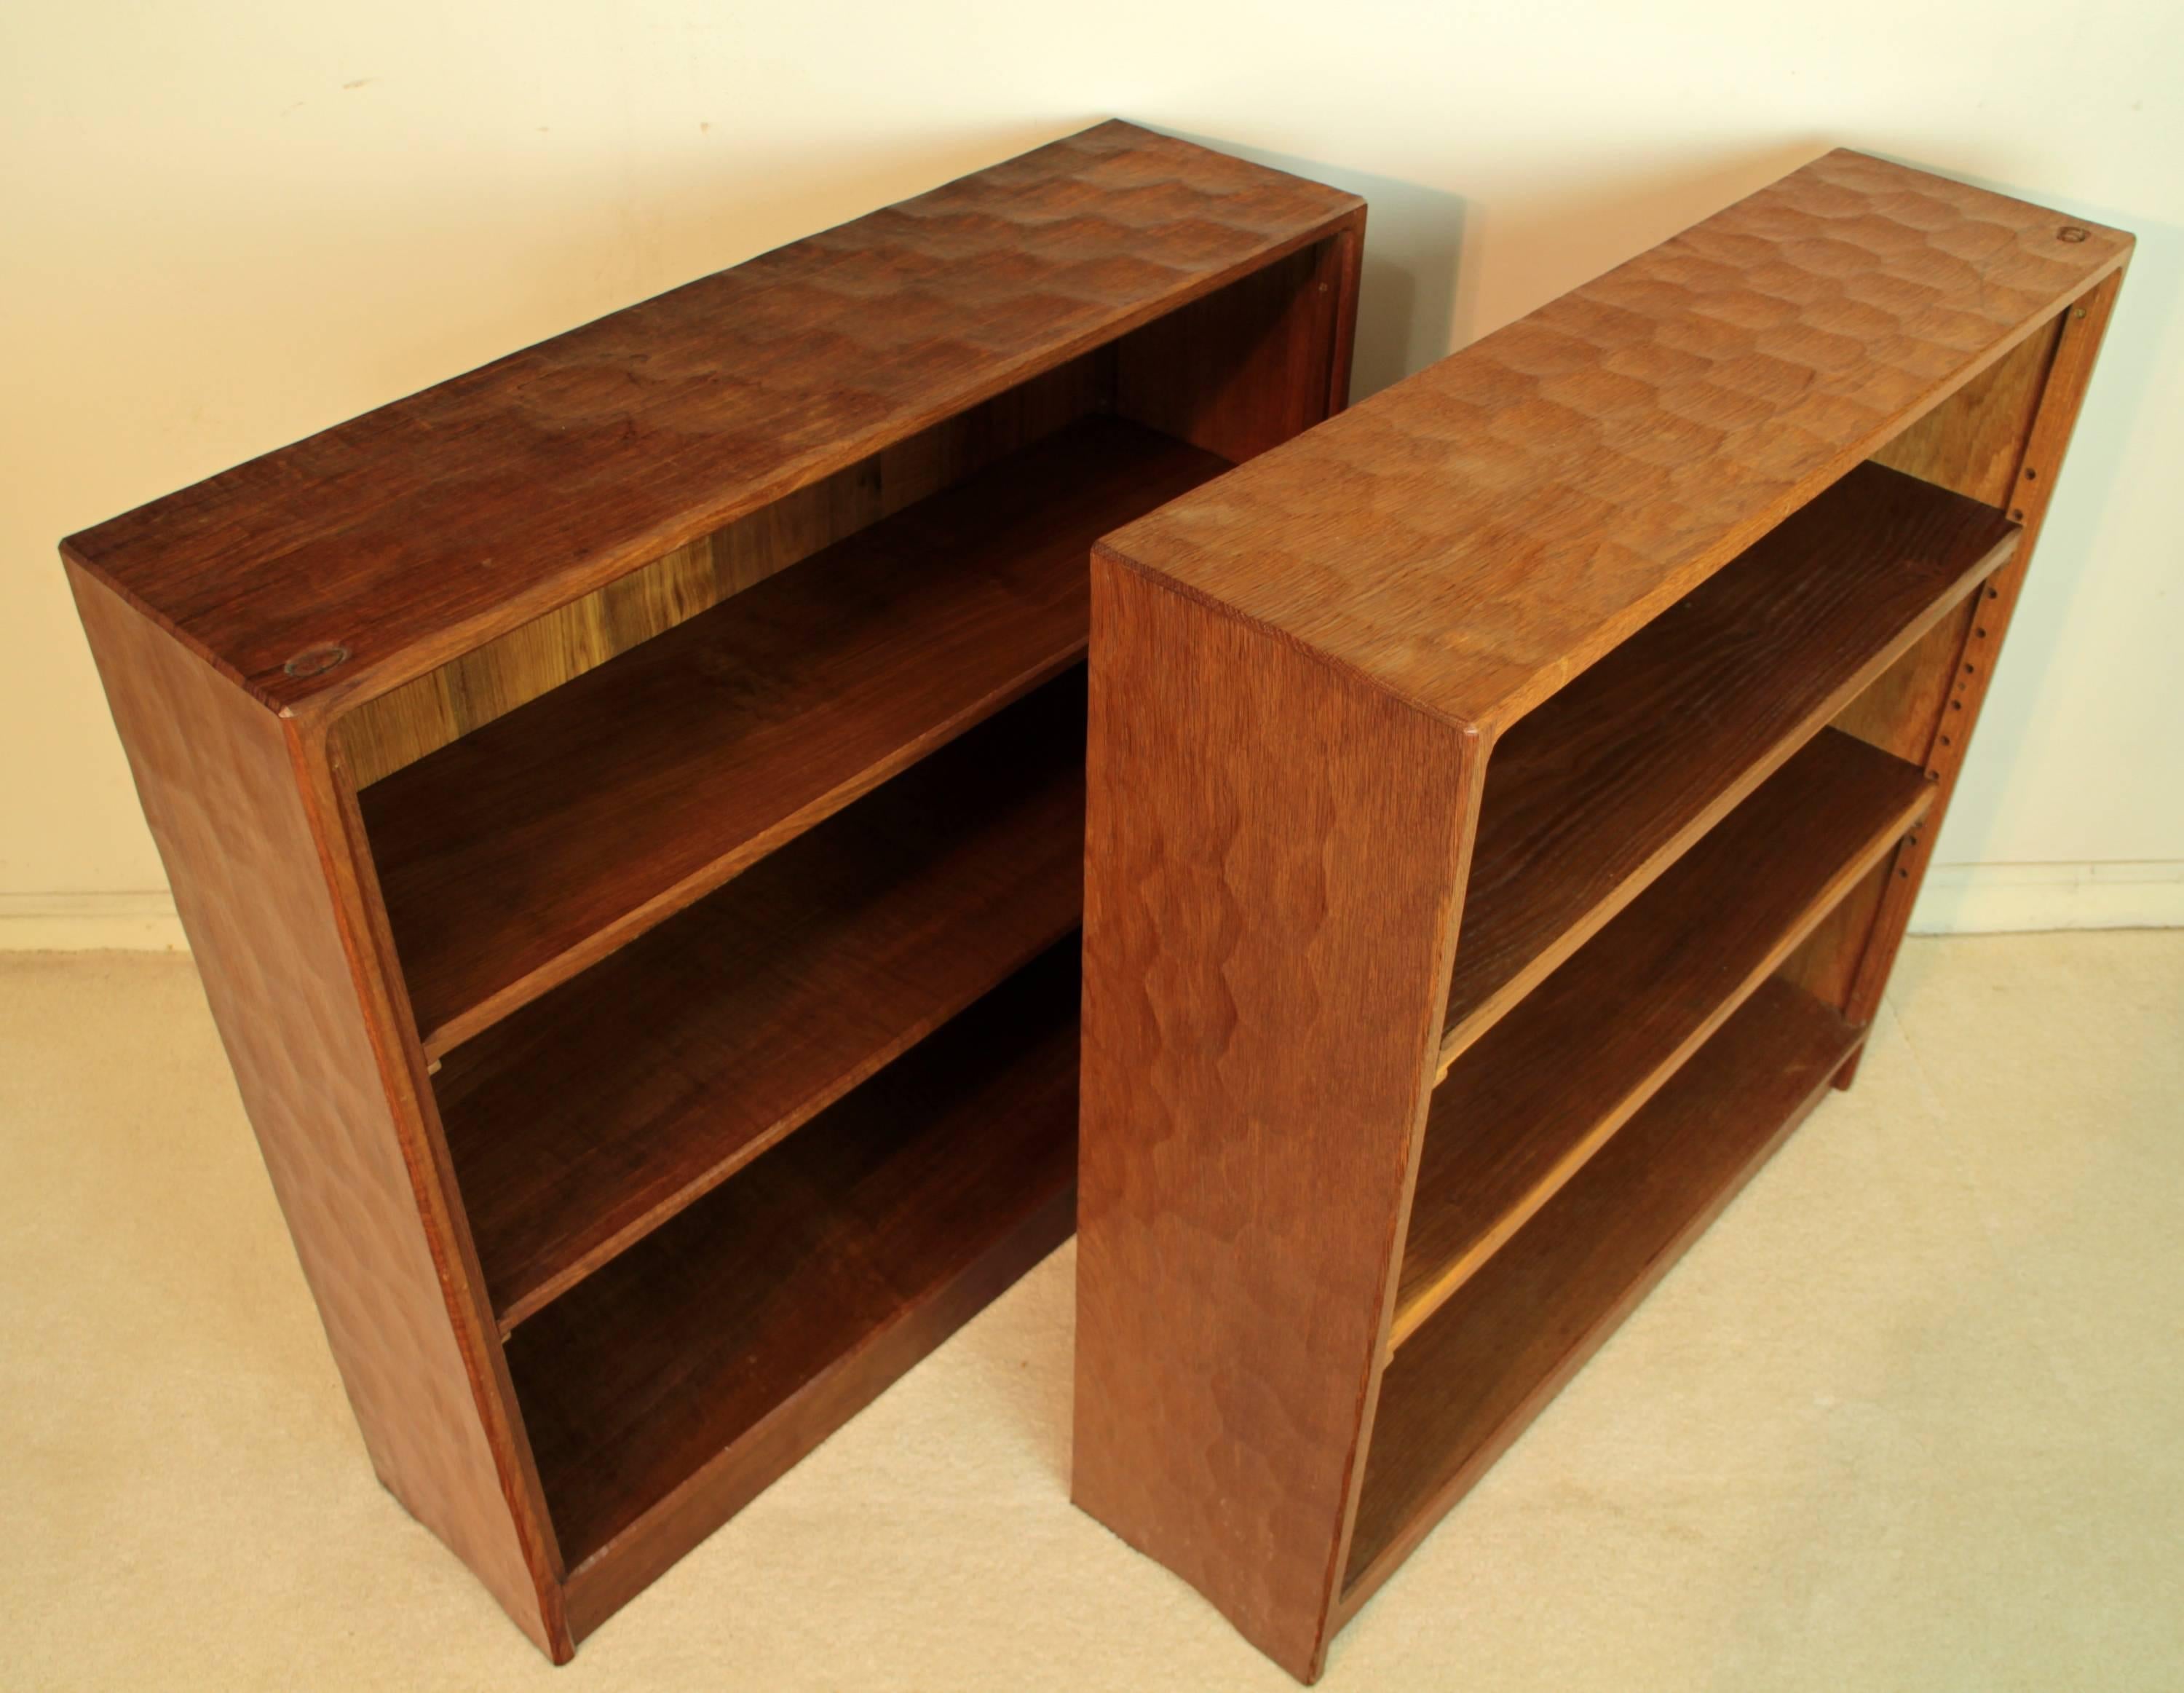 A rare pair of adzed oak open bookcases by Alan “Acornman” Grainger and dating to circa 1970. The adzed top and sides give a distinctive handcrafted wavy pattern to the surface and each has two adjustable shelves and carved acorn signature trademark